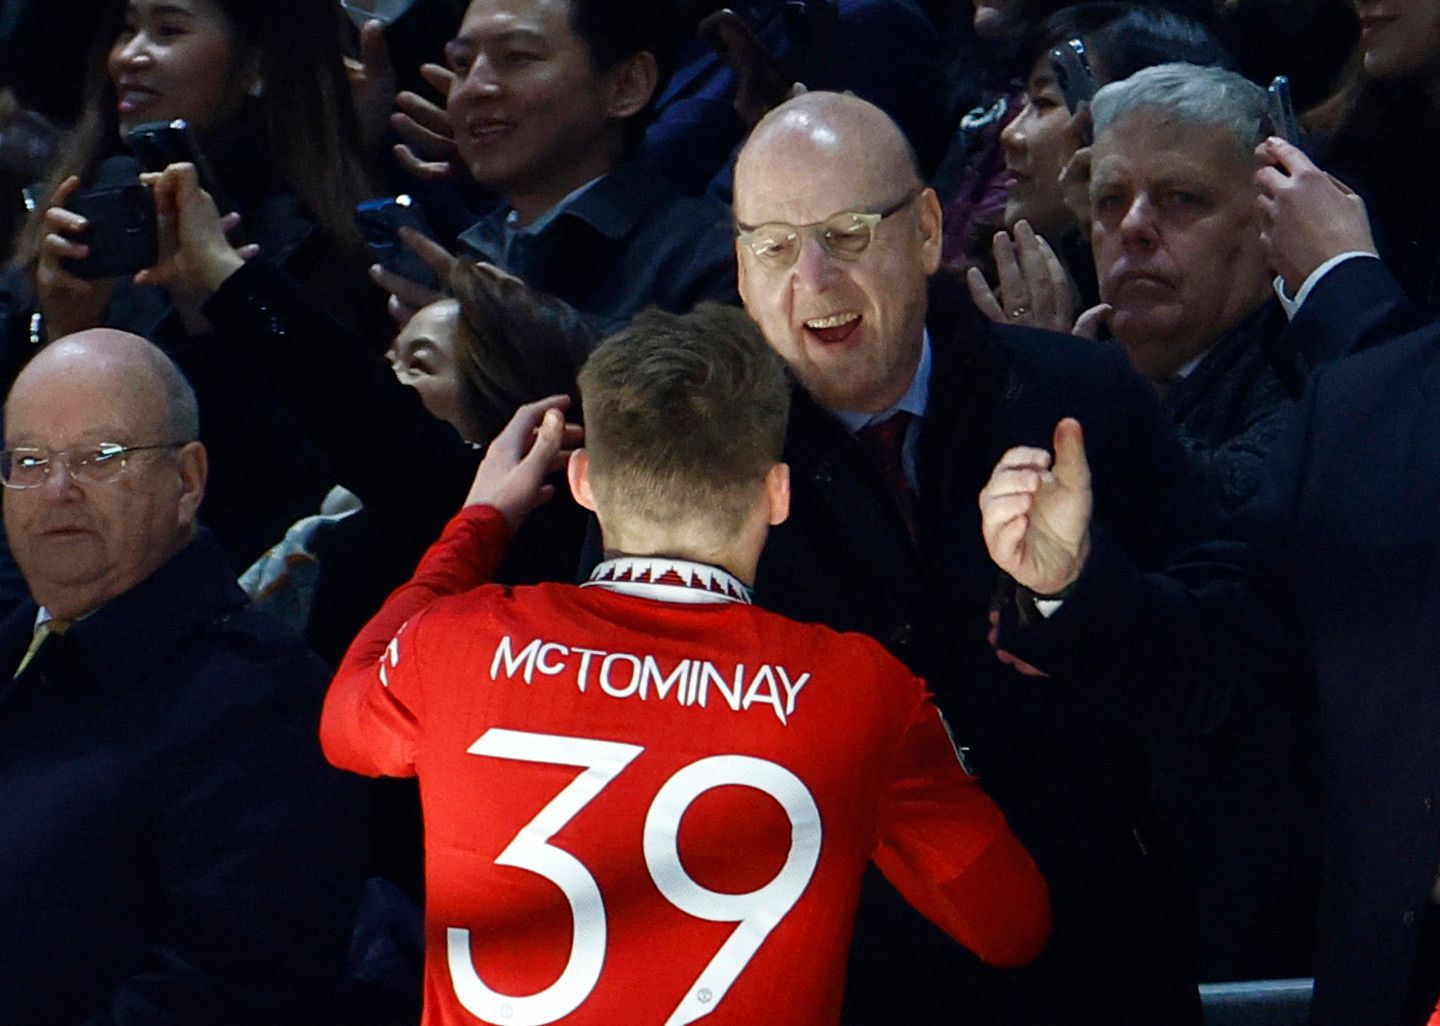 Soccer Football - Carabao Cup - Final - Manchester United v Newcastle United - Wembley Stadium, London, Britain - February 26, 2023  Manchester United's Scott McTominay celebrates with co owner Avram Glazer after winning the Carabao Cup final Action Images via Reuters/John Sibley EDITORIAL USE ONLY. No use with unauthorized audio, video, data, fixture lists, club/league logos or 'live' services. Online in-match use limited to 75 images, no video emulation. No use in betting, games or single club